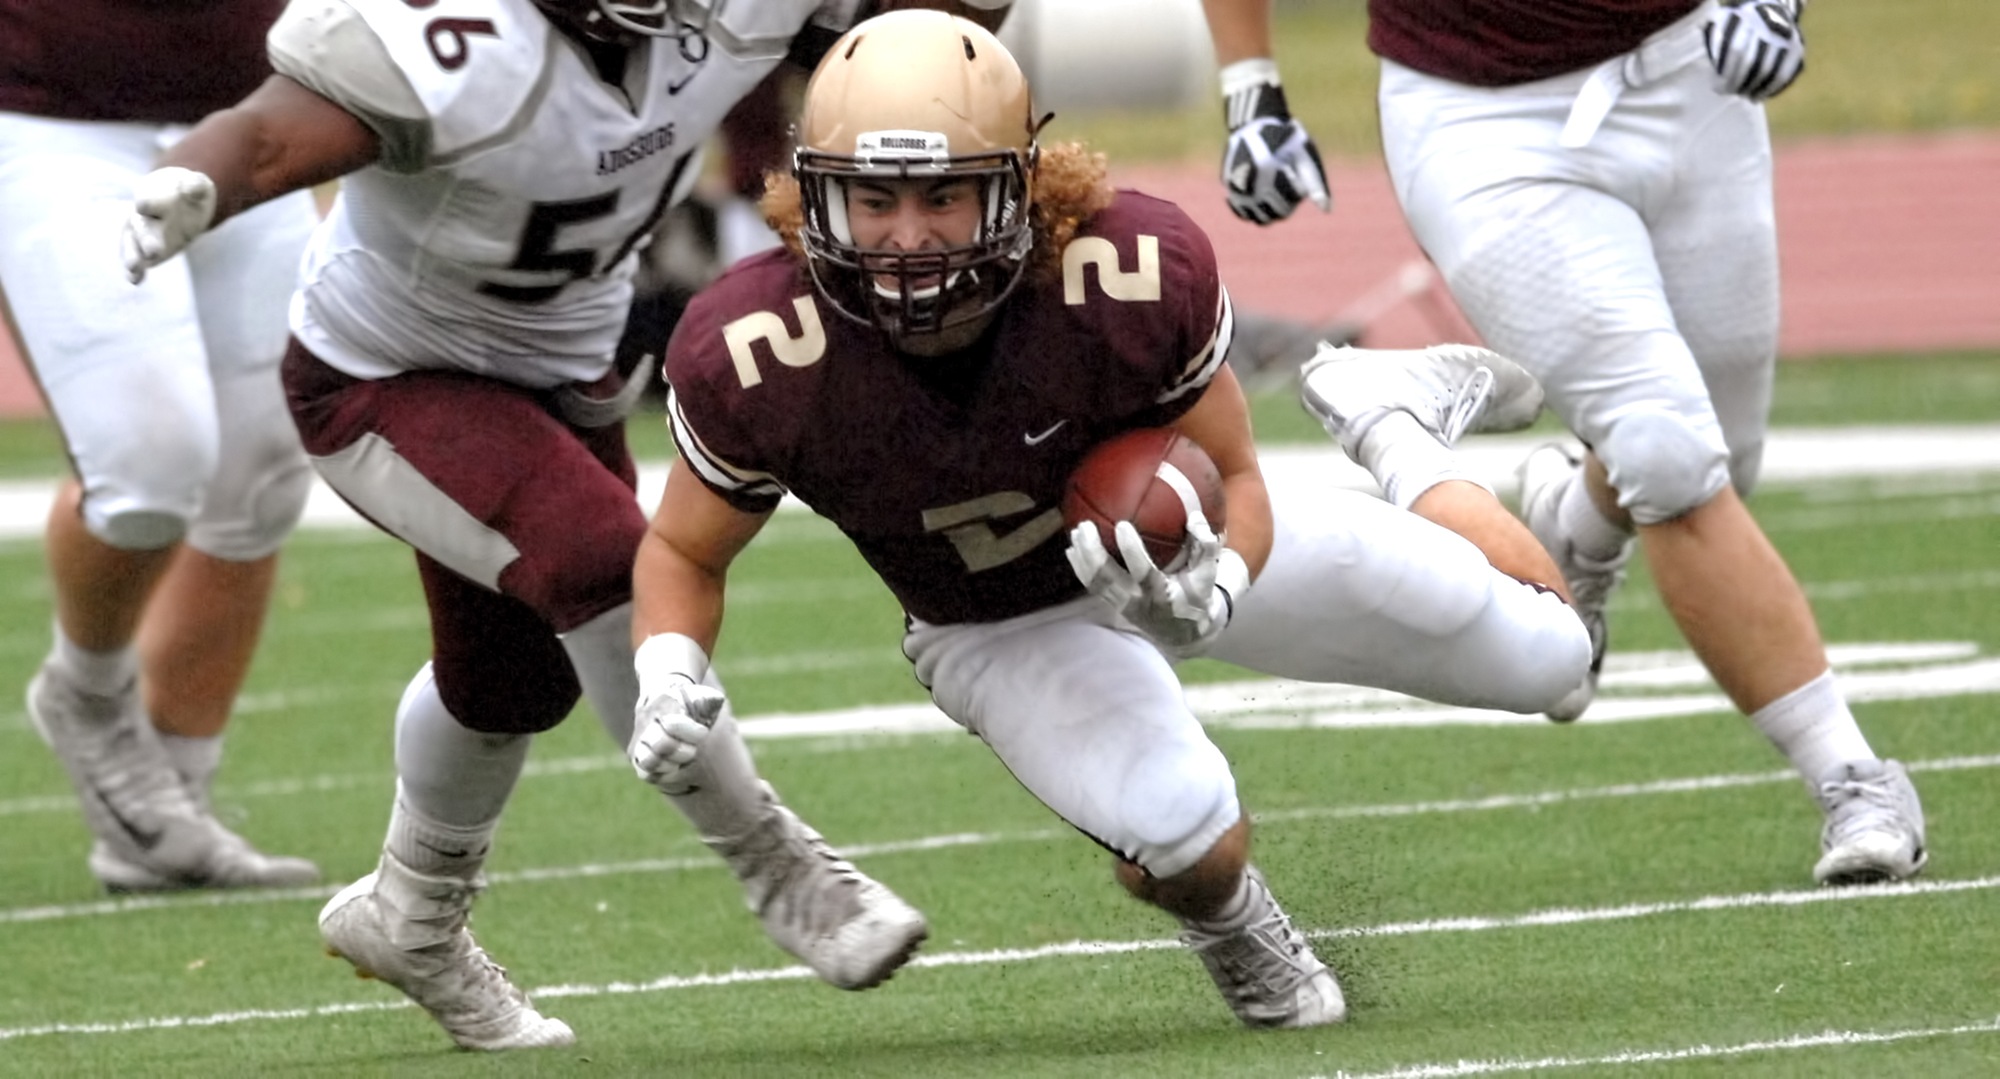 Senior Austin Maanum rushed for two touchdowns in the Cobbers' 35-12 win at Carleton.